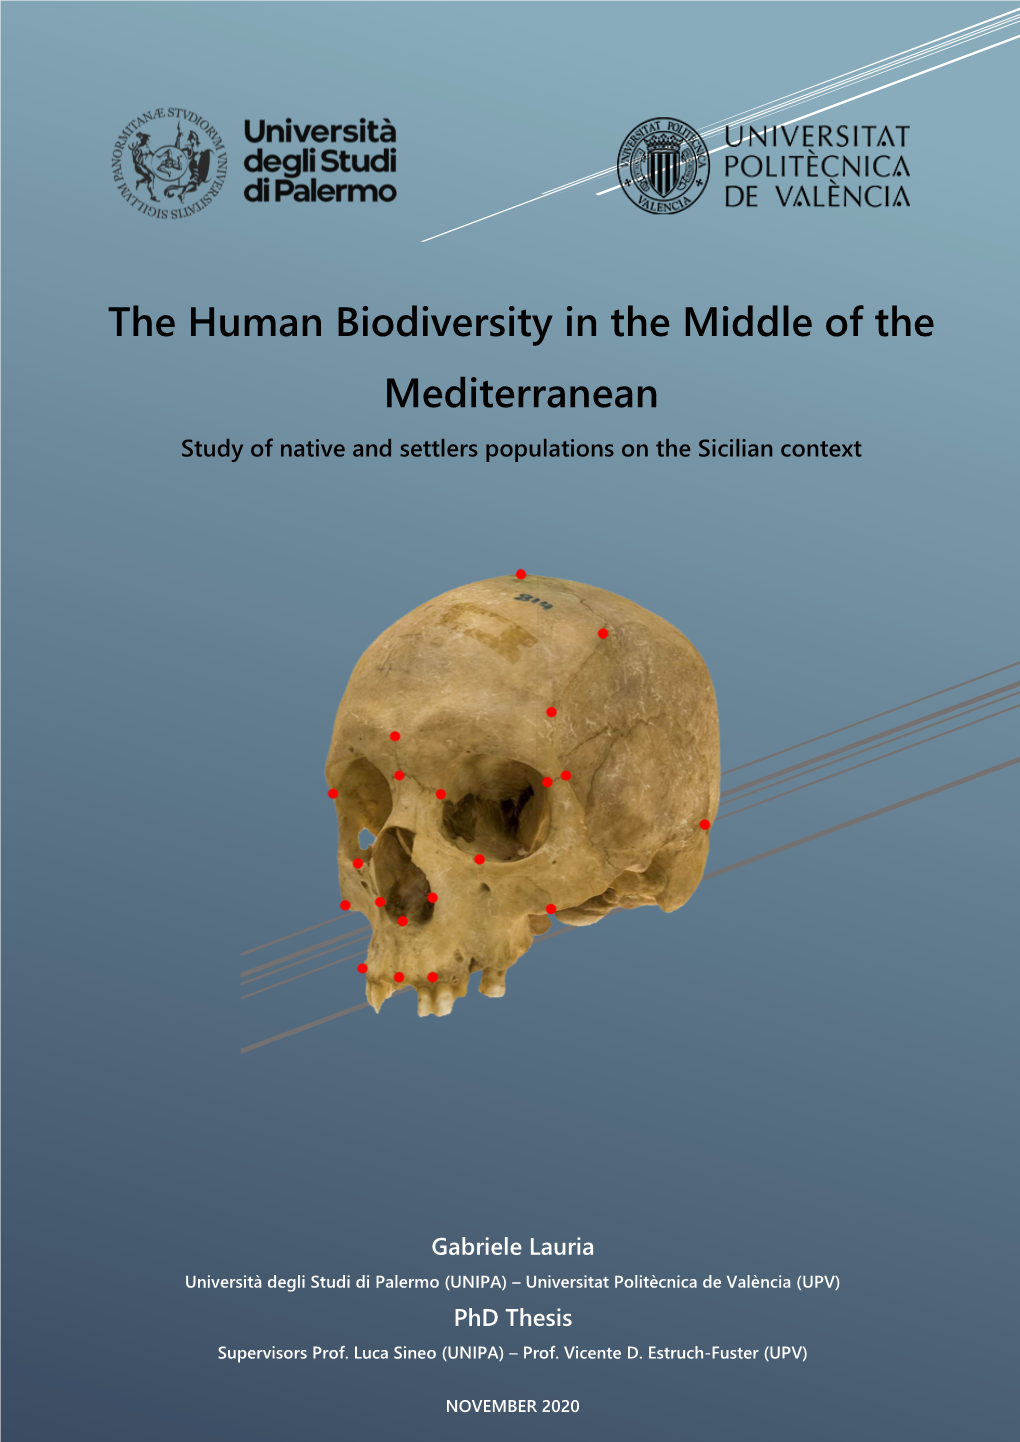 The Human Biodiversity in the Middle of Mediterranean: Study of Native